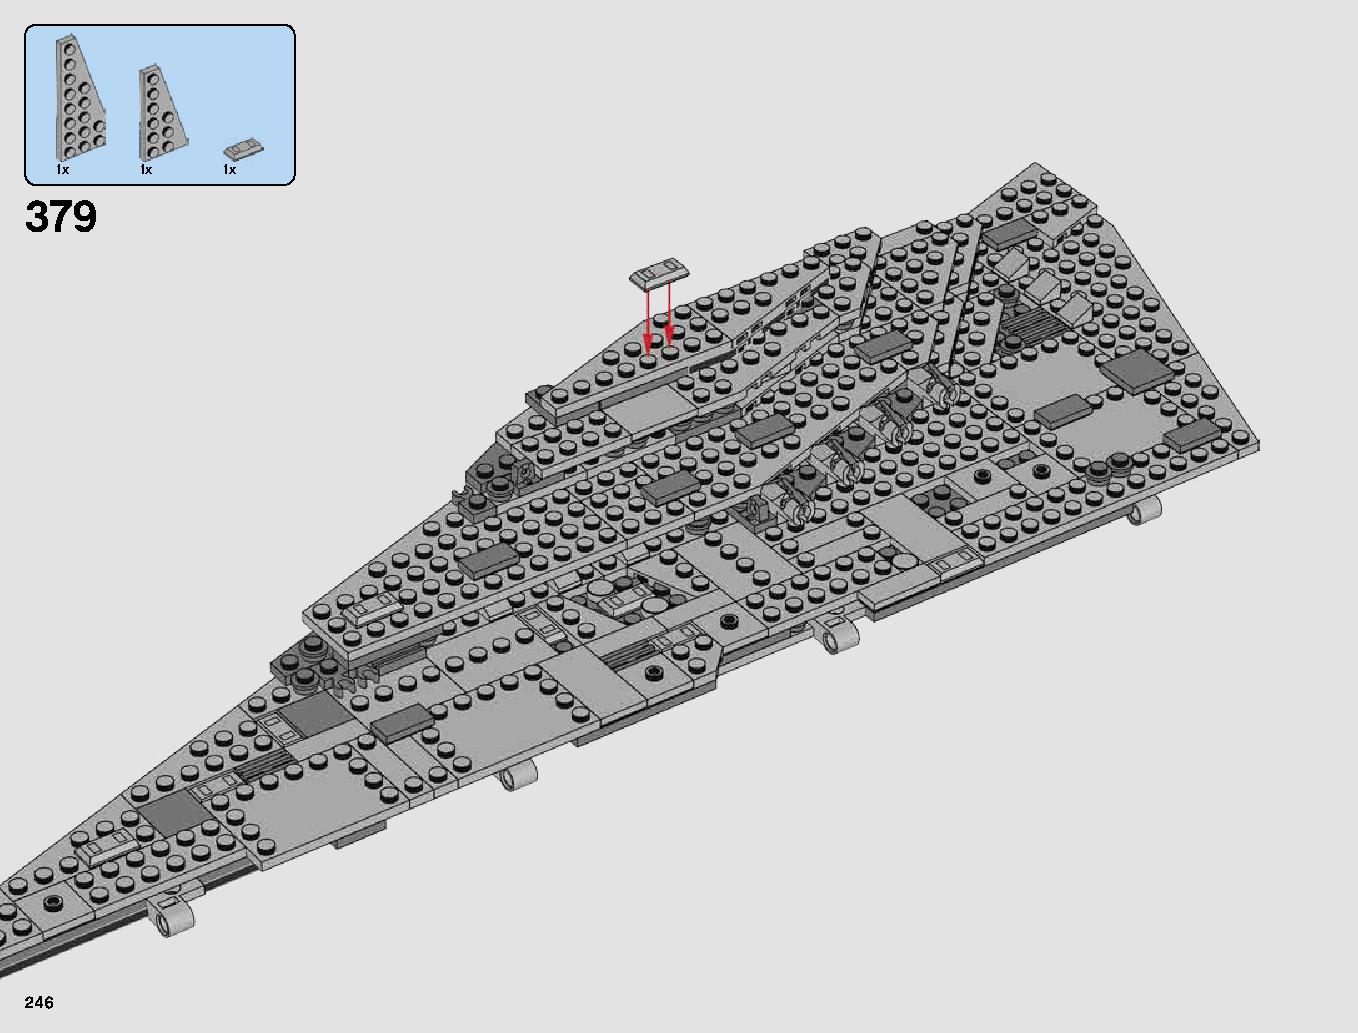 First Order Star Destroyer 75190 LEGO information LEGO instructions 246 page